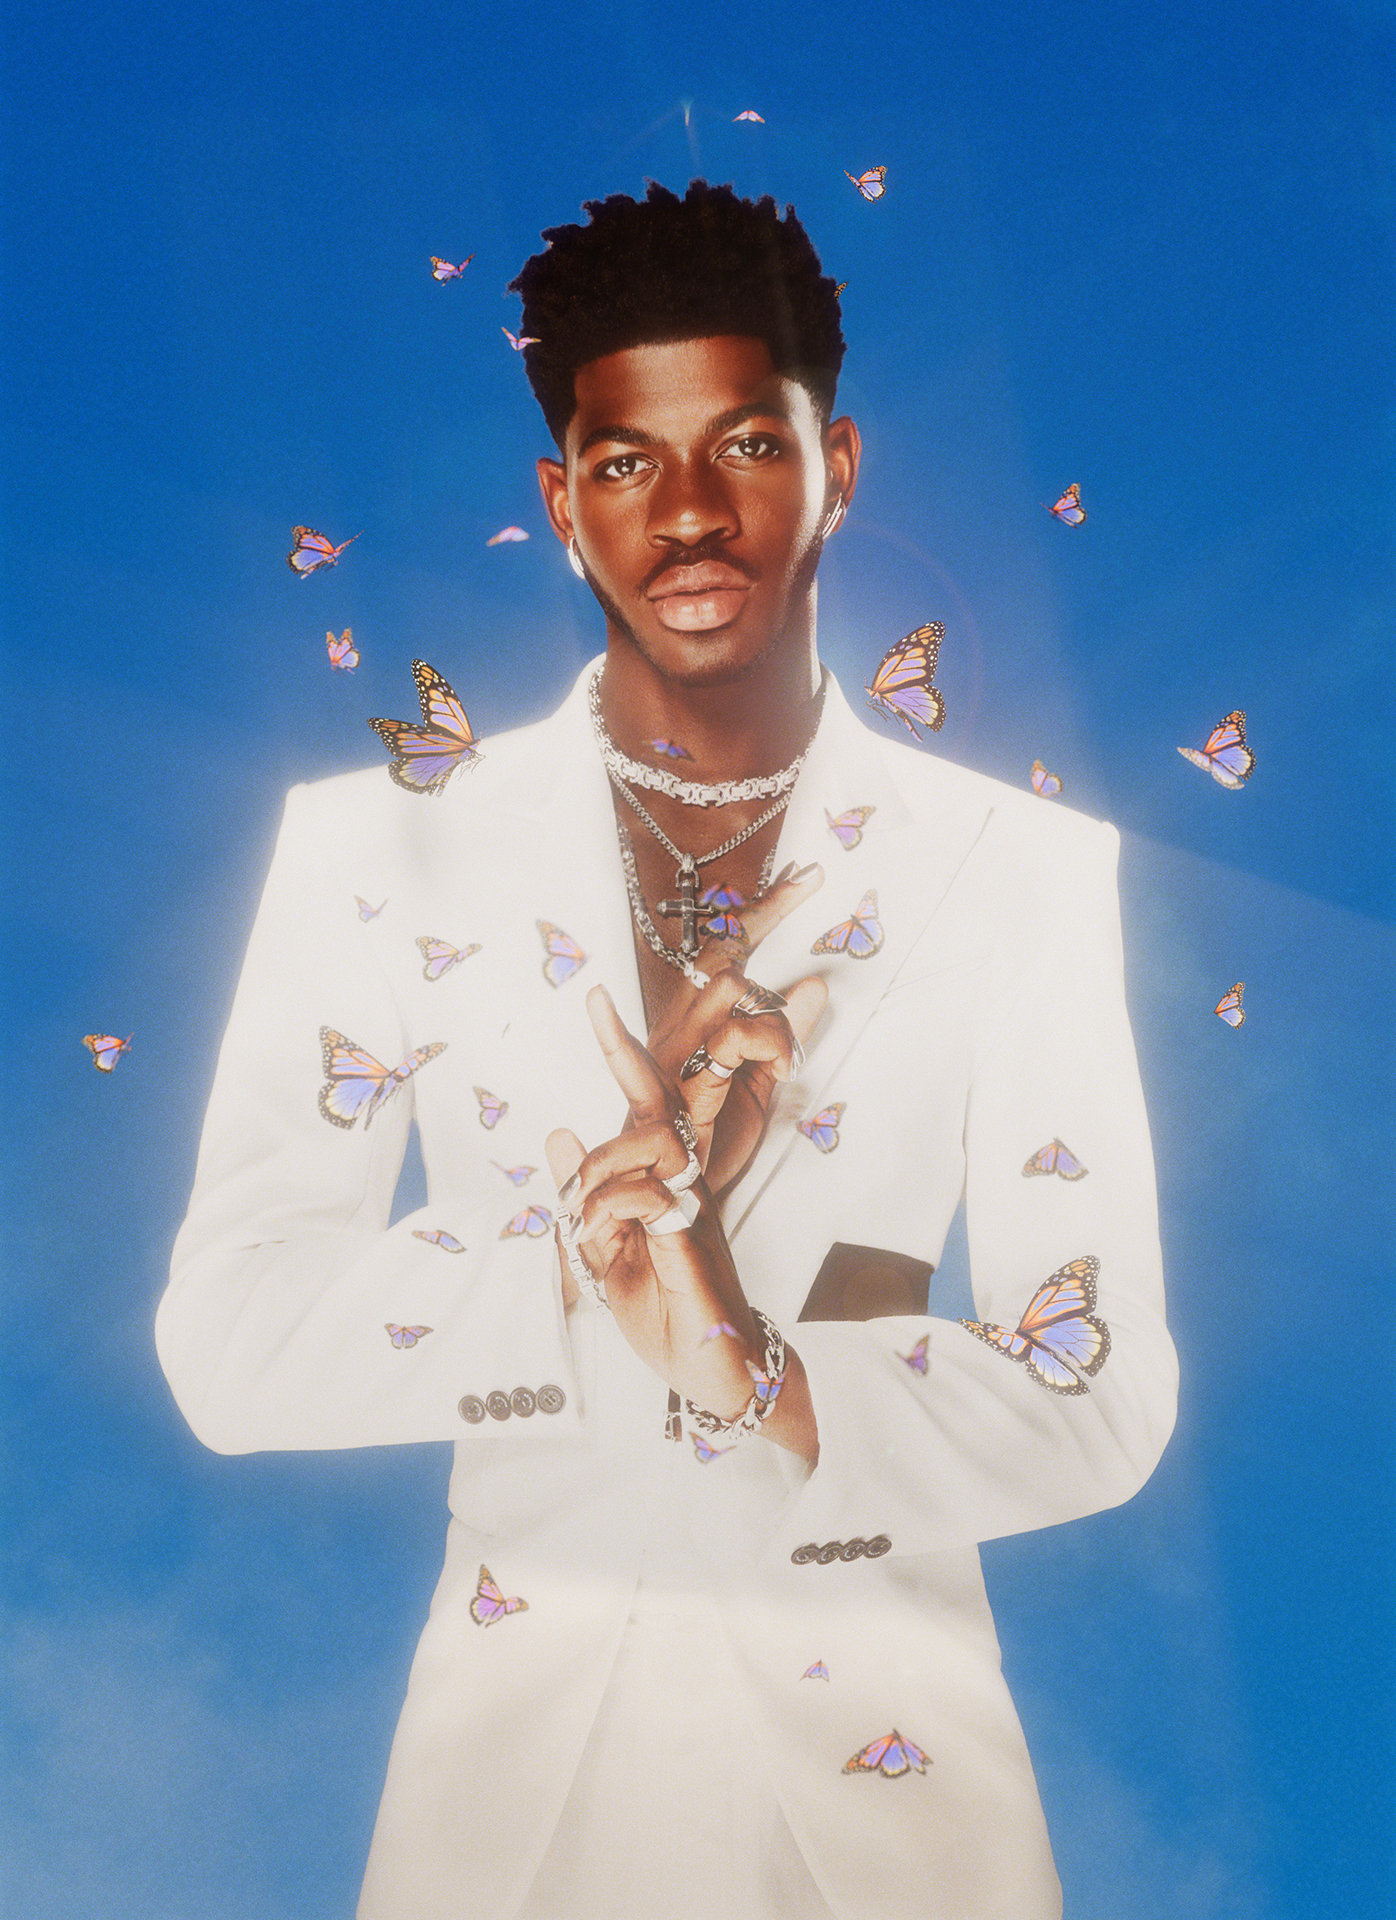 Rap star Lil Nas X will be one of the headliners at the BottleRock Napa Valley 2023 festival in Napa. (Charlotte Rutherford)